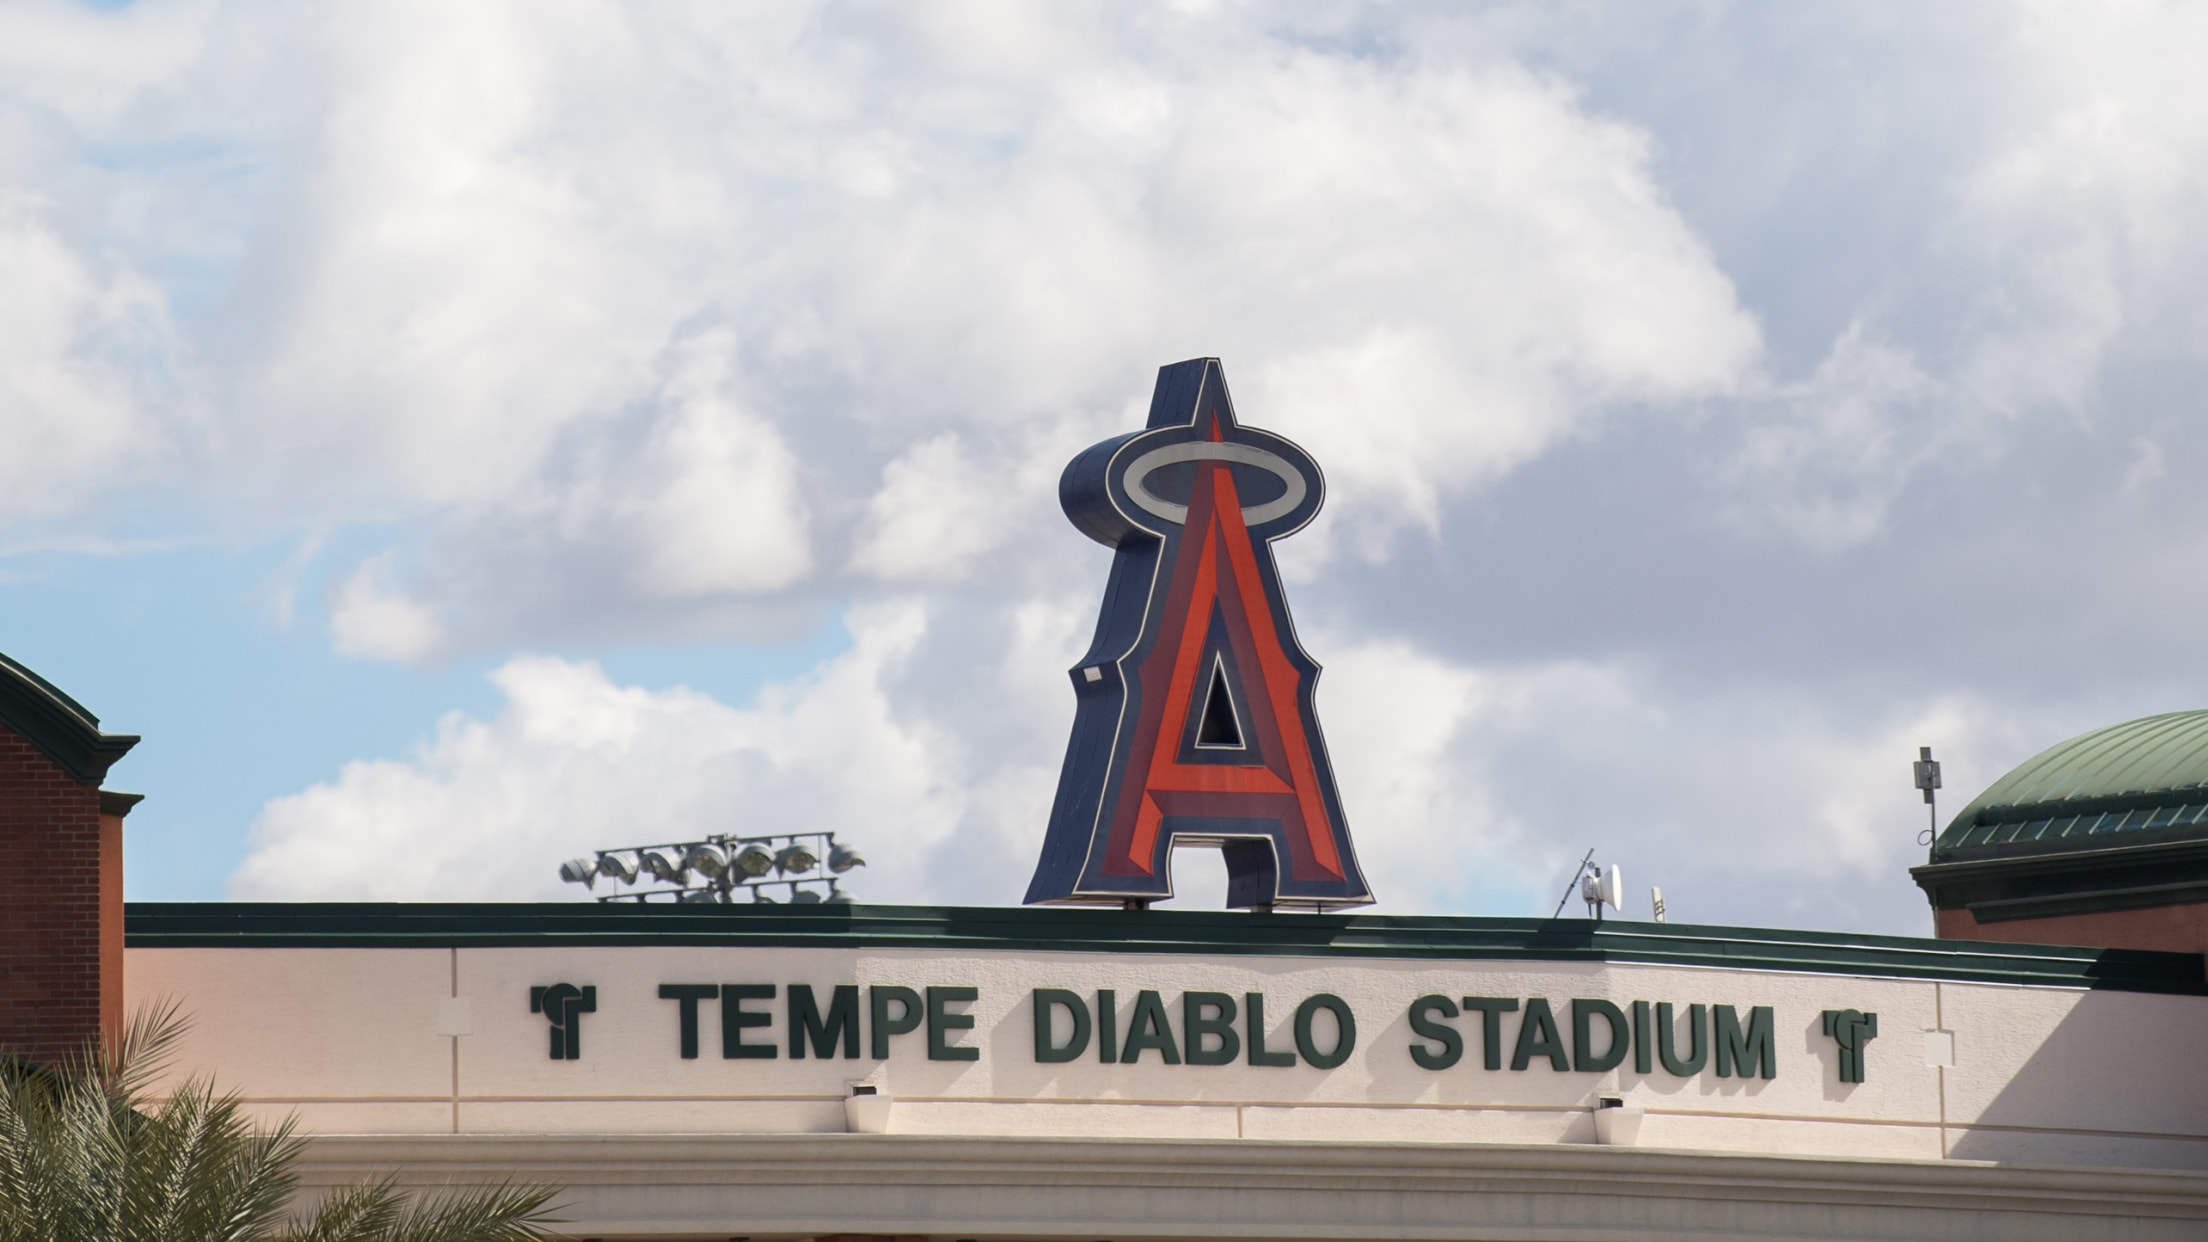 LAA Spring Training 2021: Sights & Sounds 